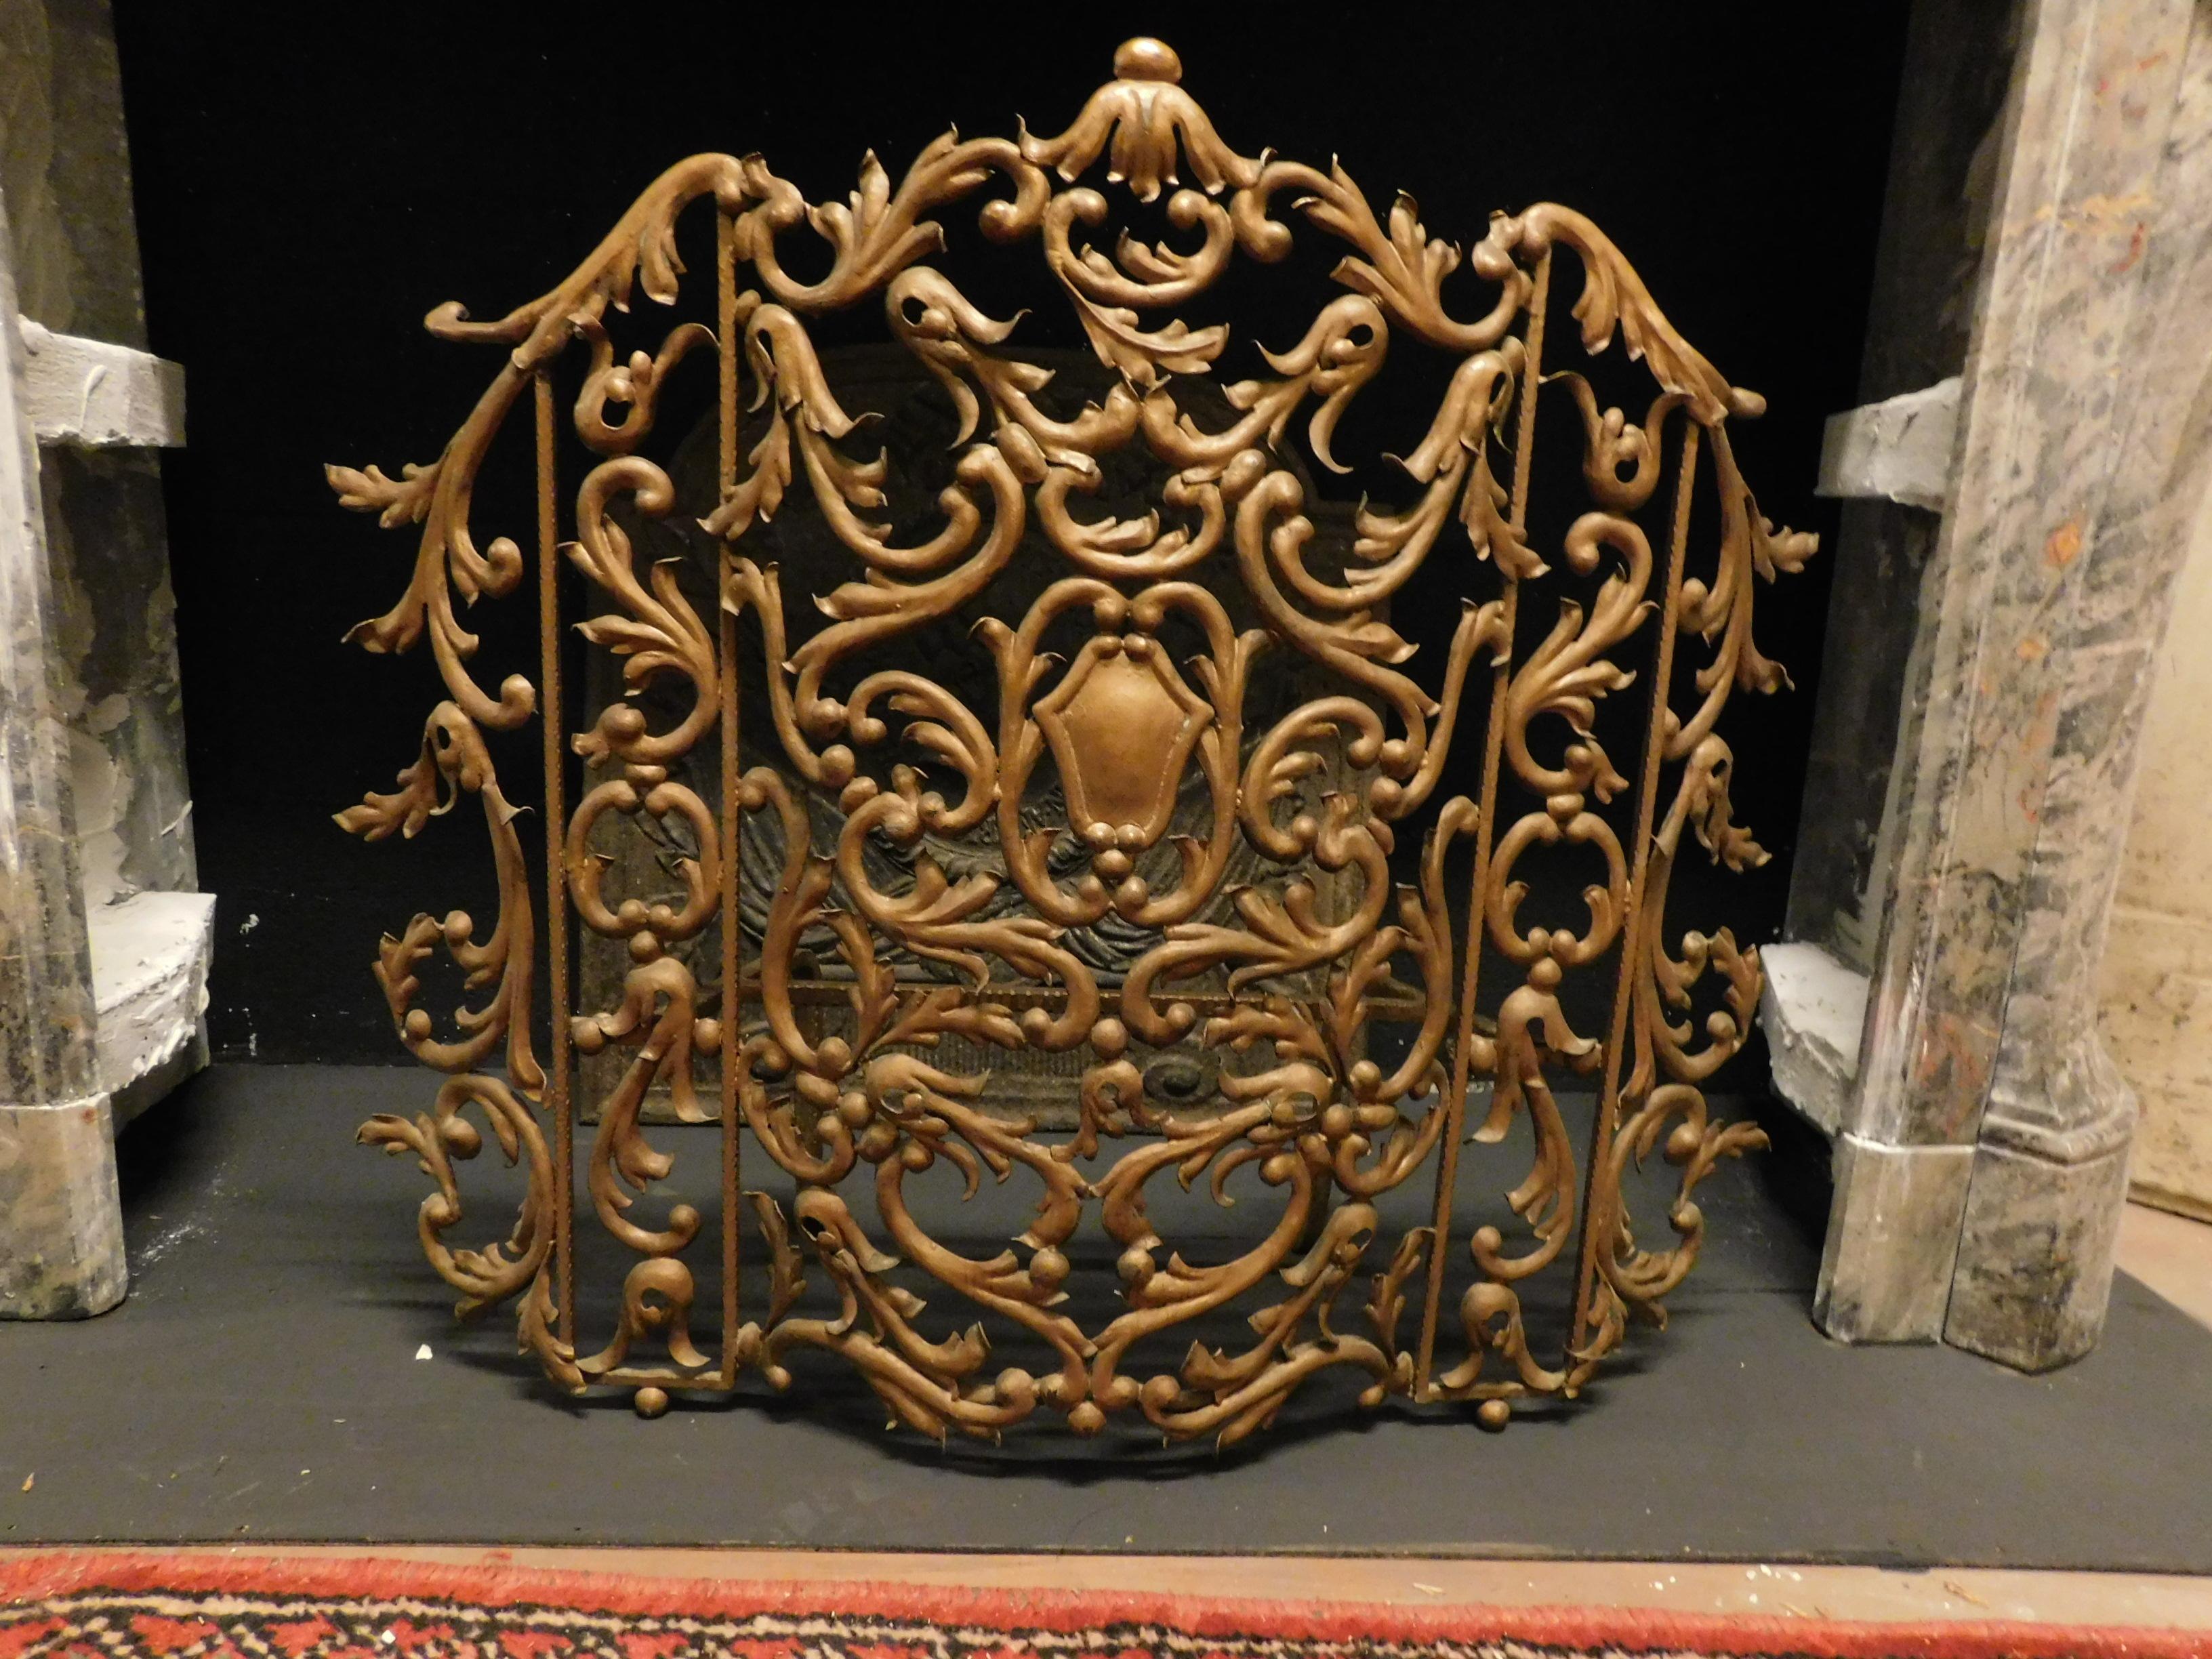 Vintage spark arrestor, richly carved in wrought iron, gilded and pierced, built for rich fireplace in the 20th century, in Italy.
Rich, elegant and refined, suitable for decorating even the oldest fireplaces or for use in an imaginative